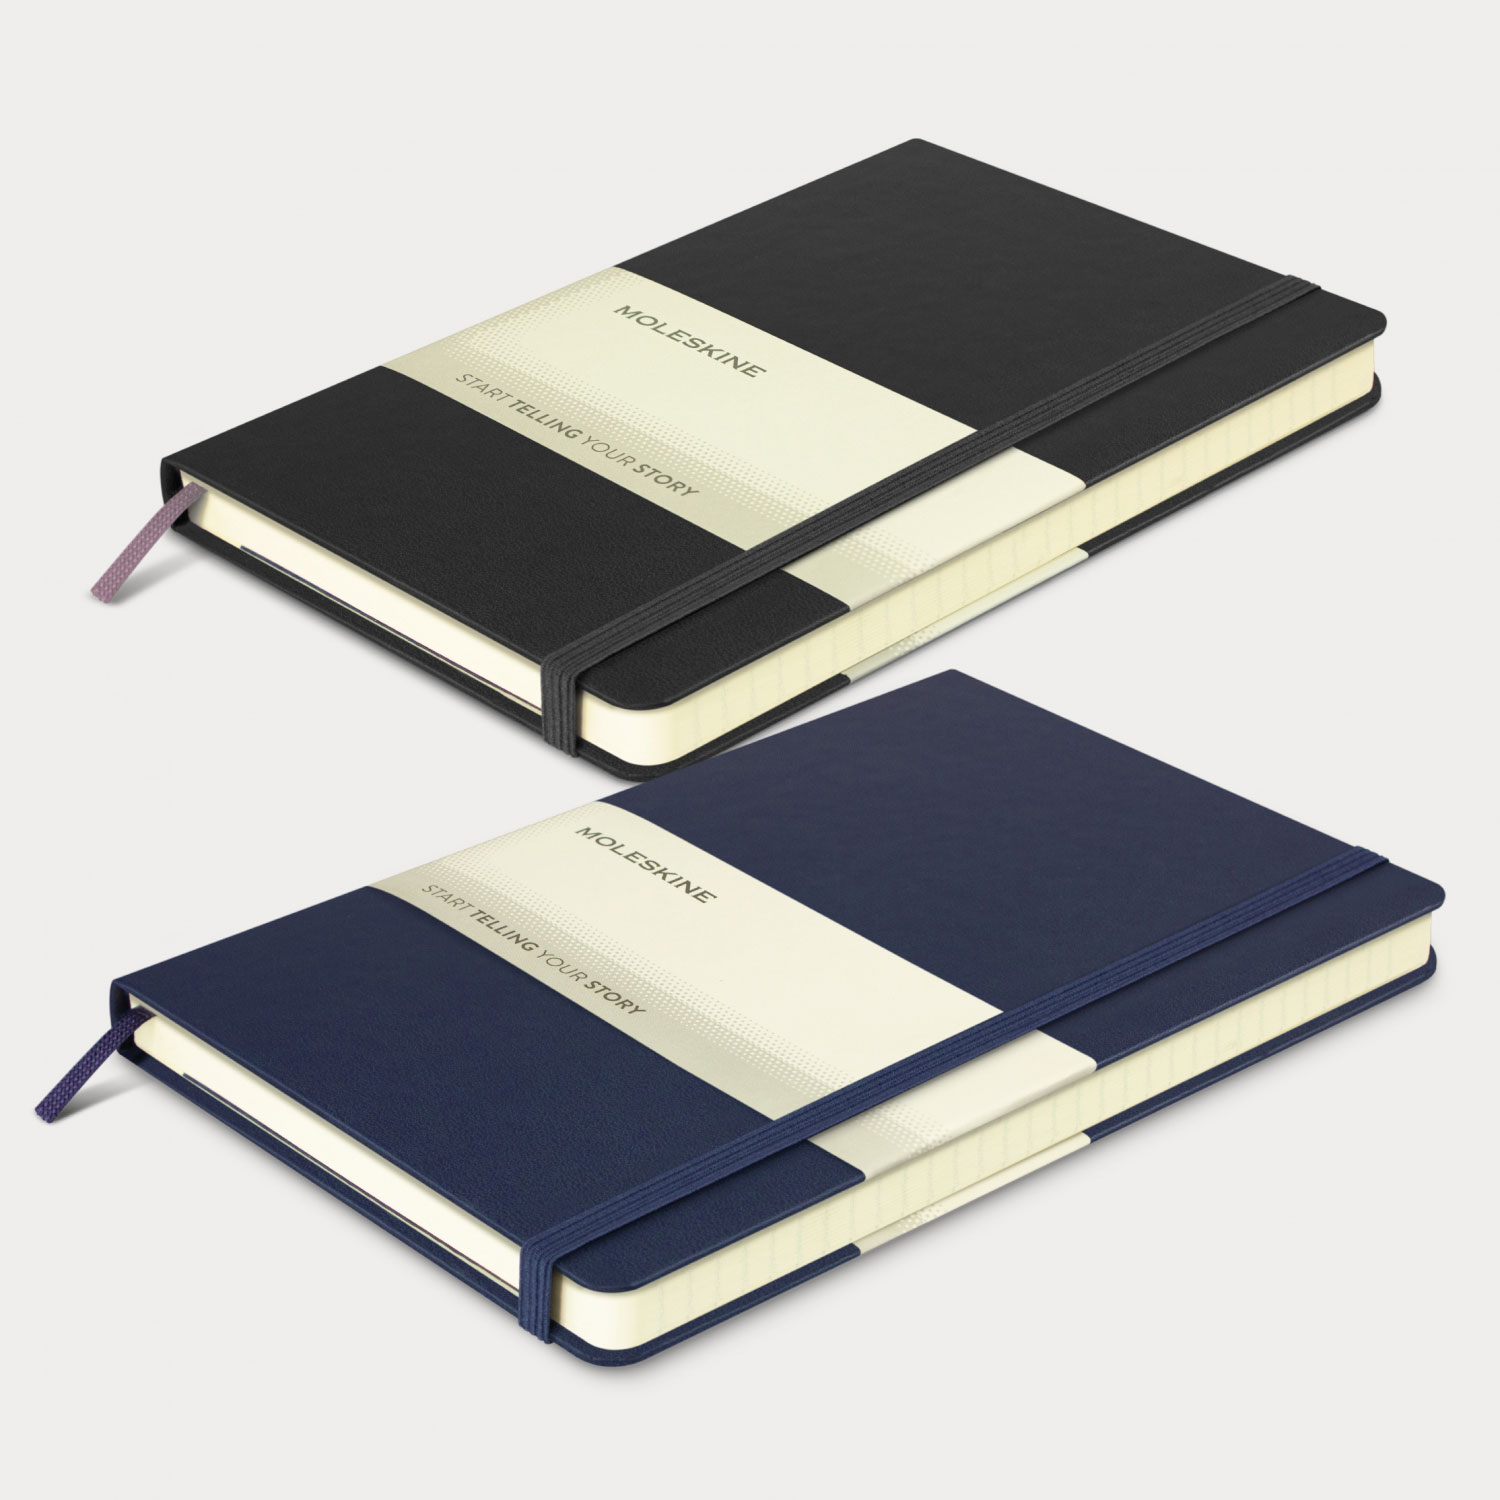 hard cover notebooks